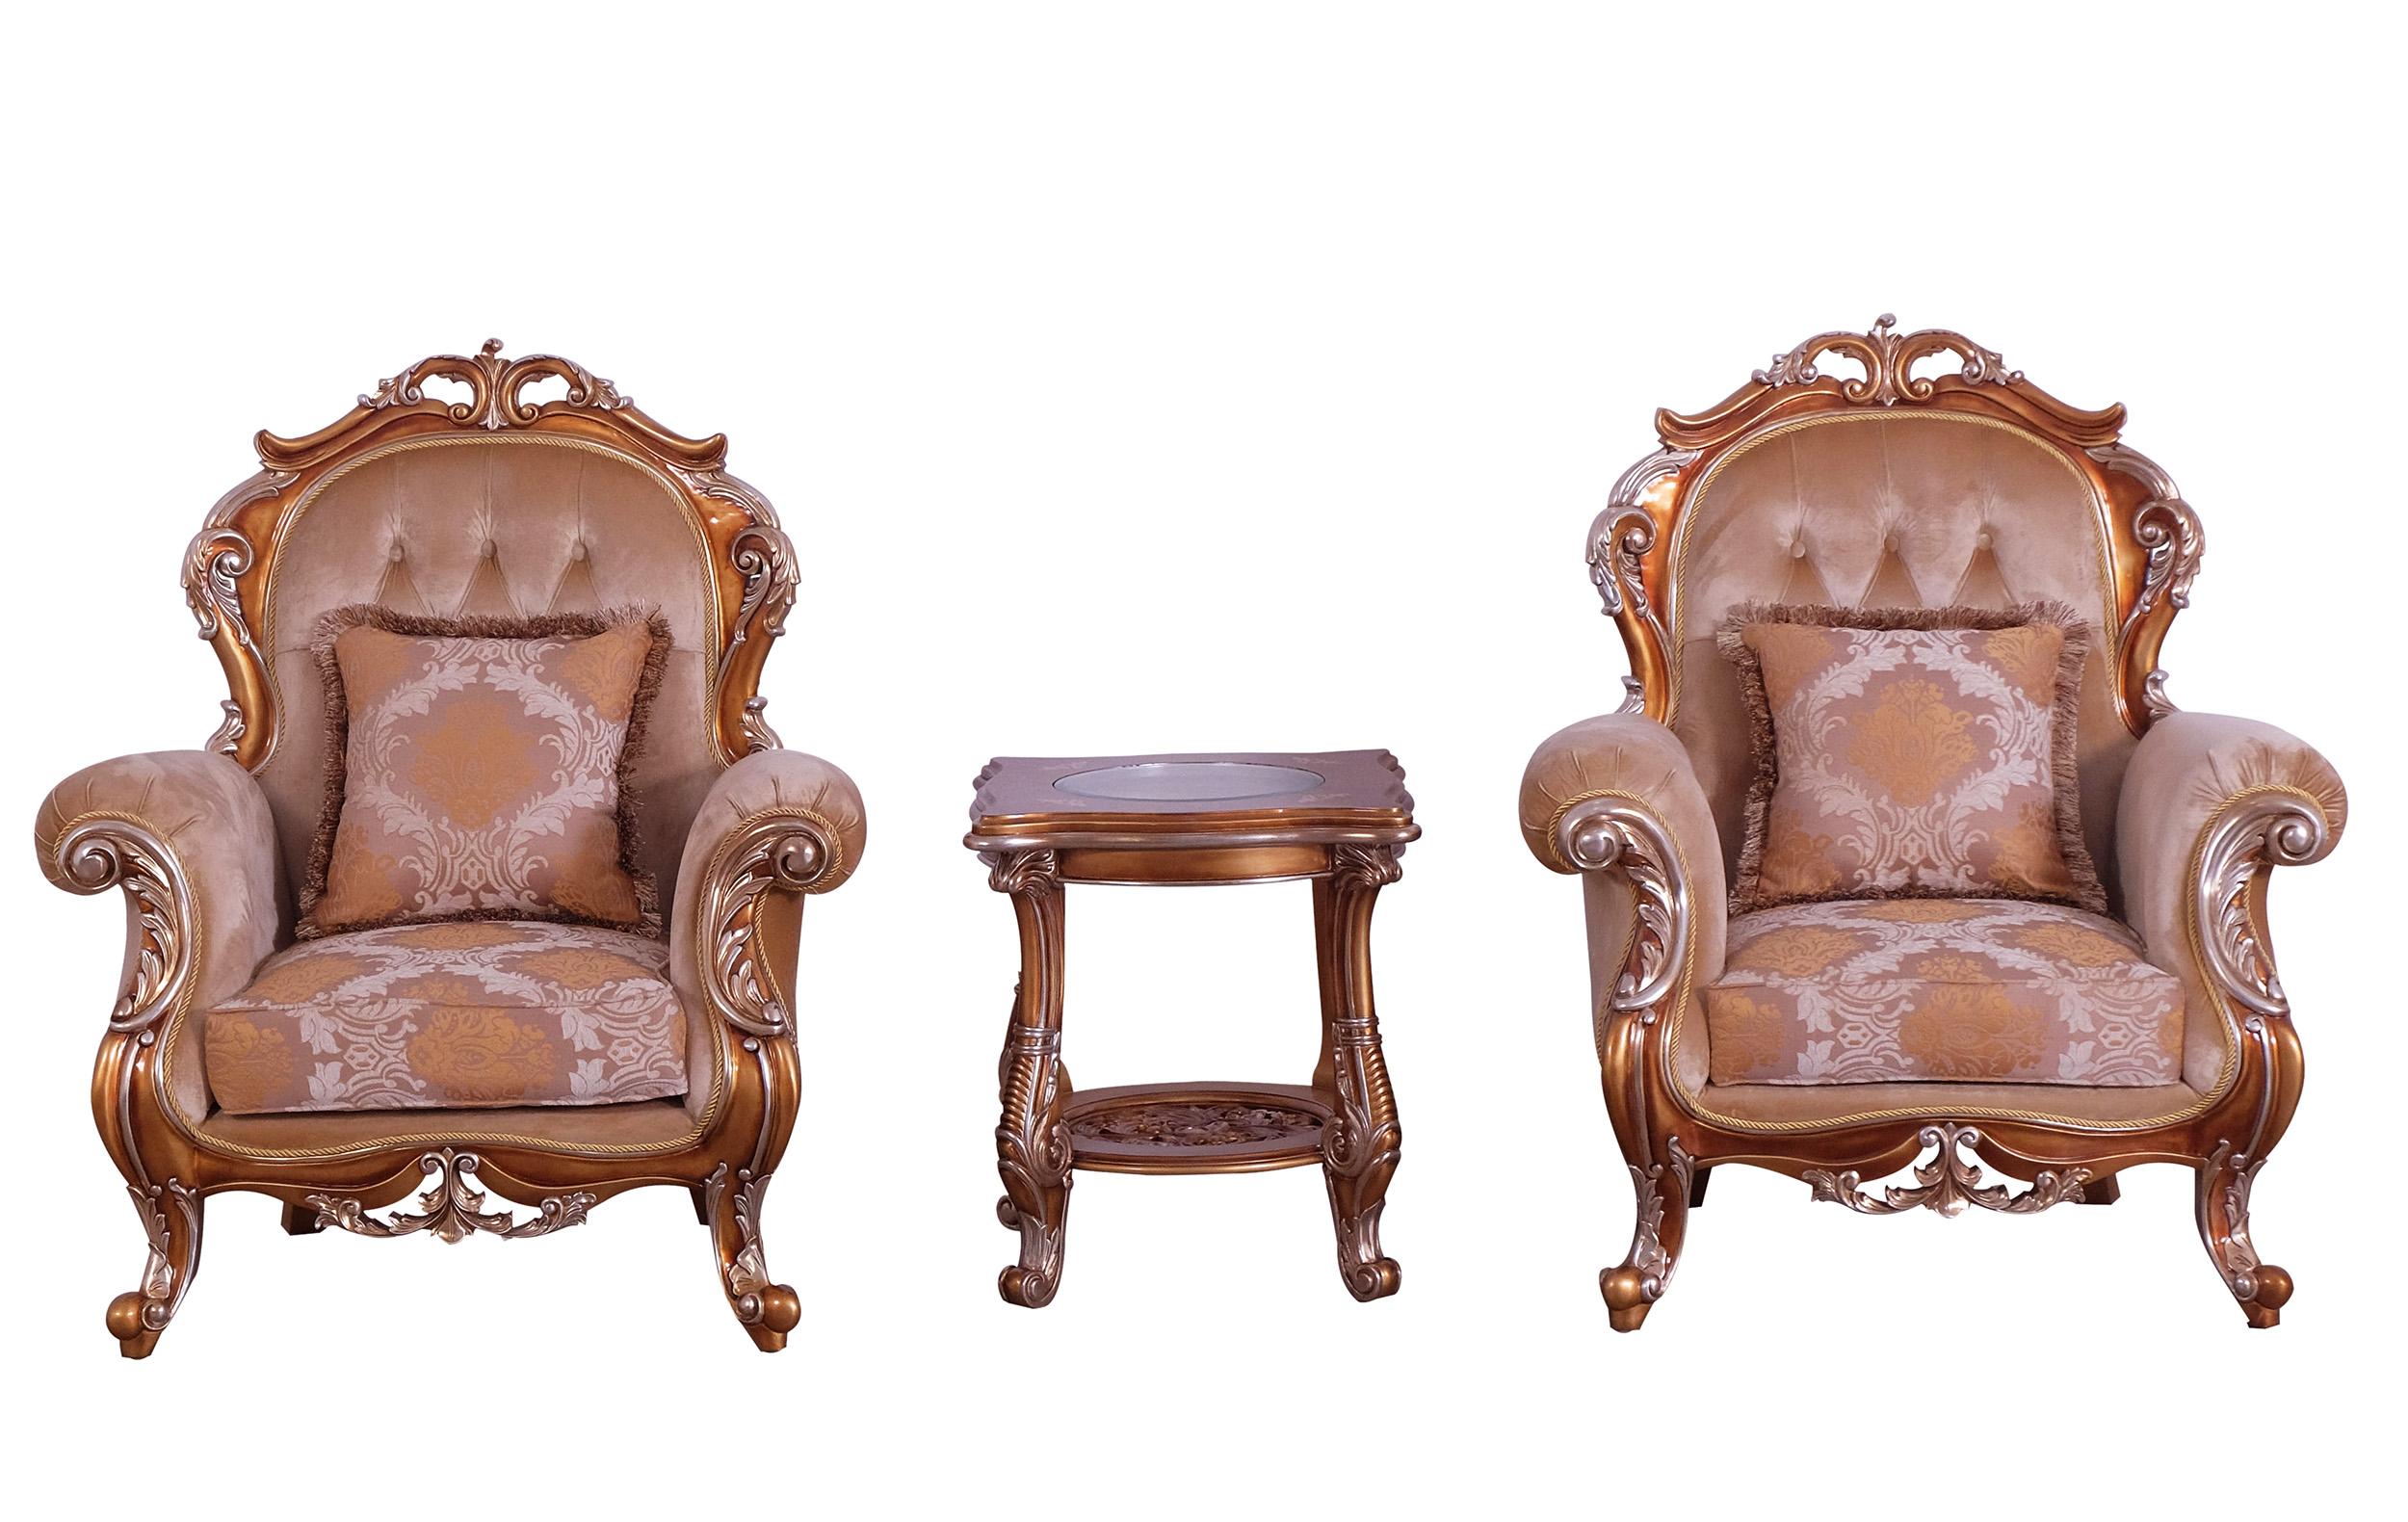 Classic, Traditional Arm Chair Set TIZIANO 38994-C-Set-2 in Antique, Silver, Gold, Brown Fabric